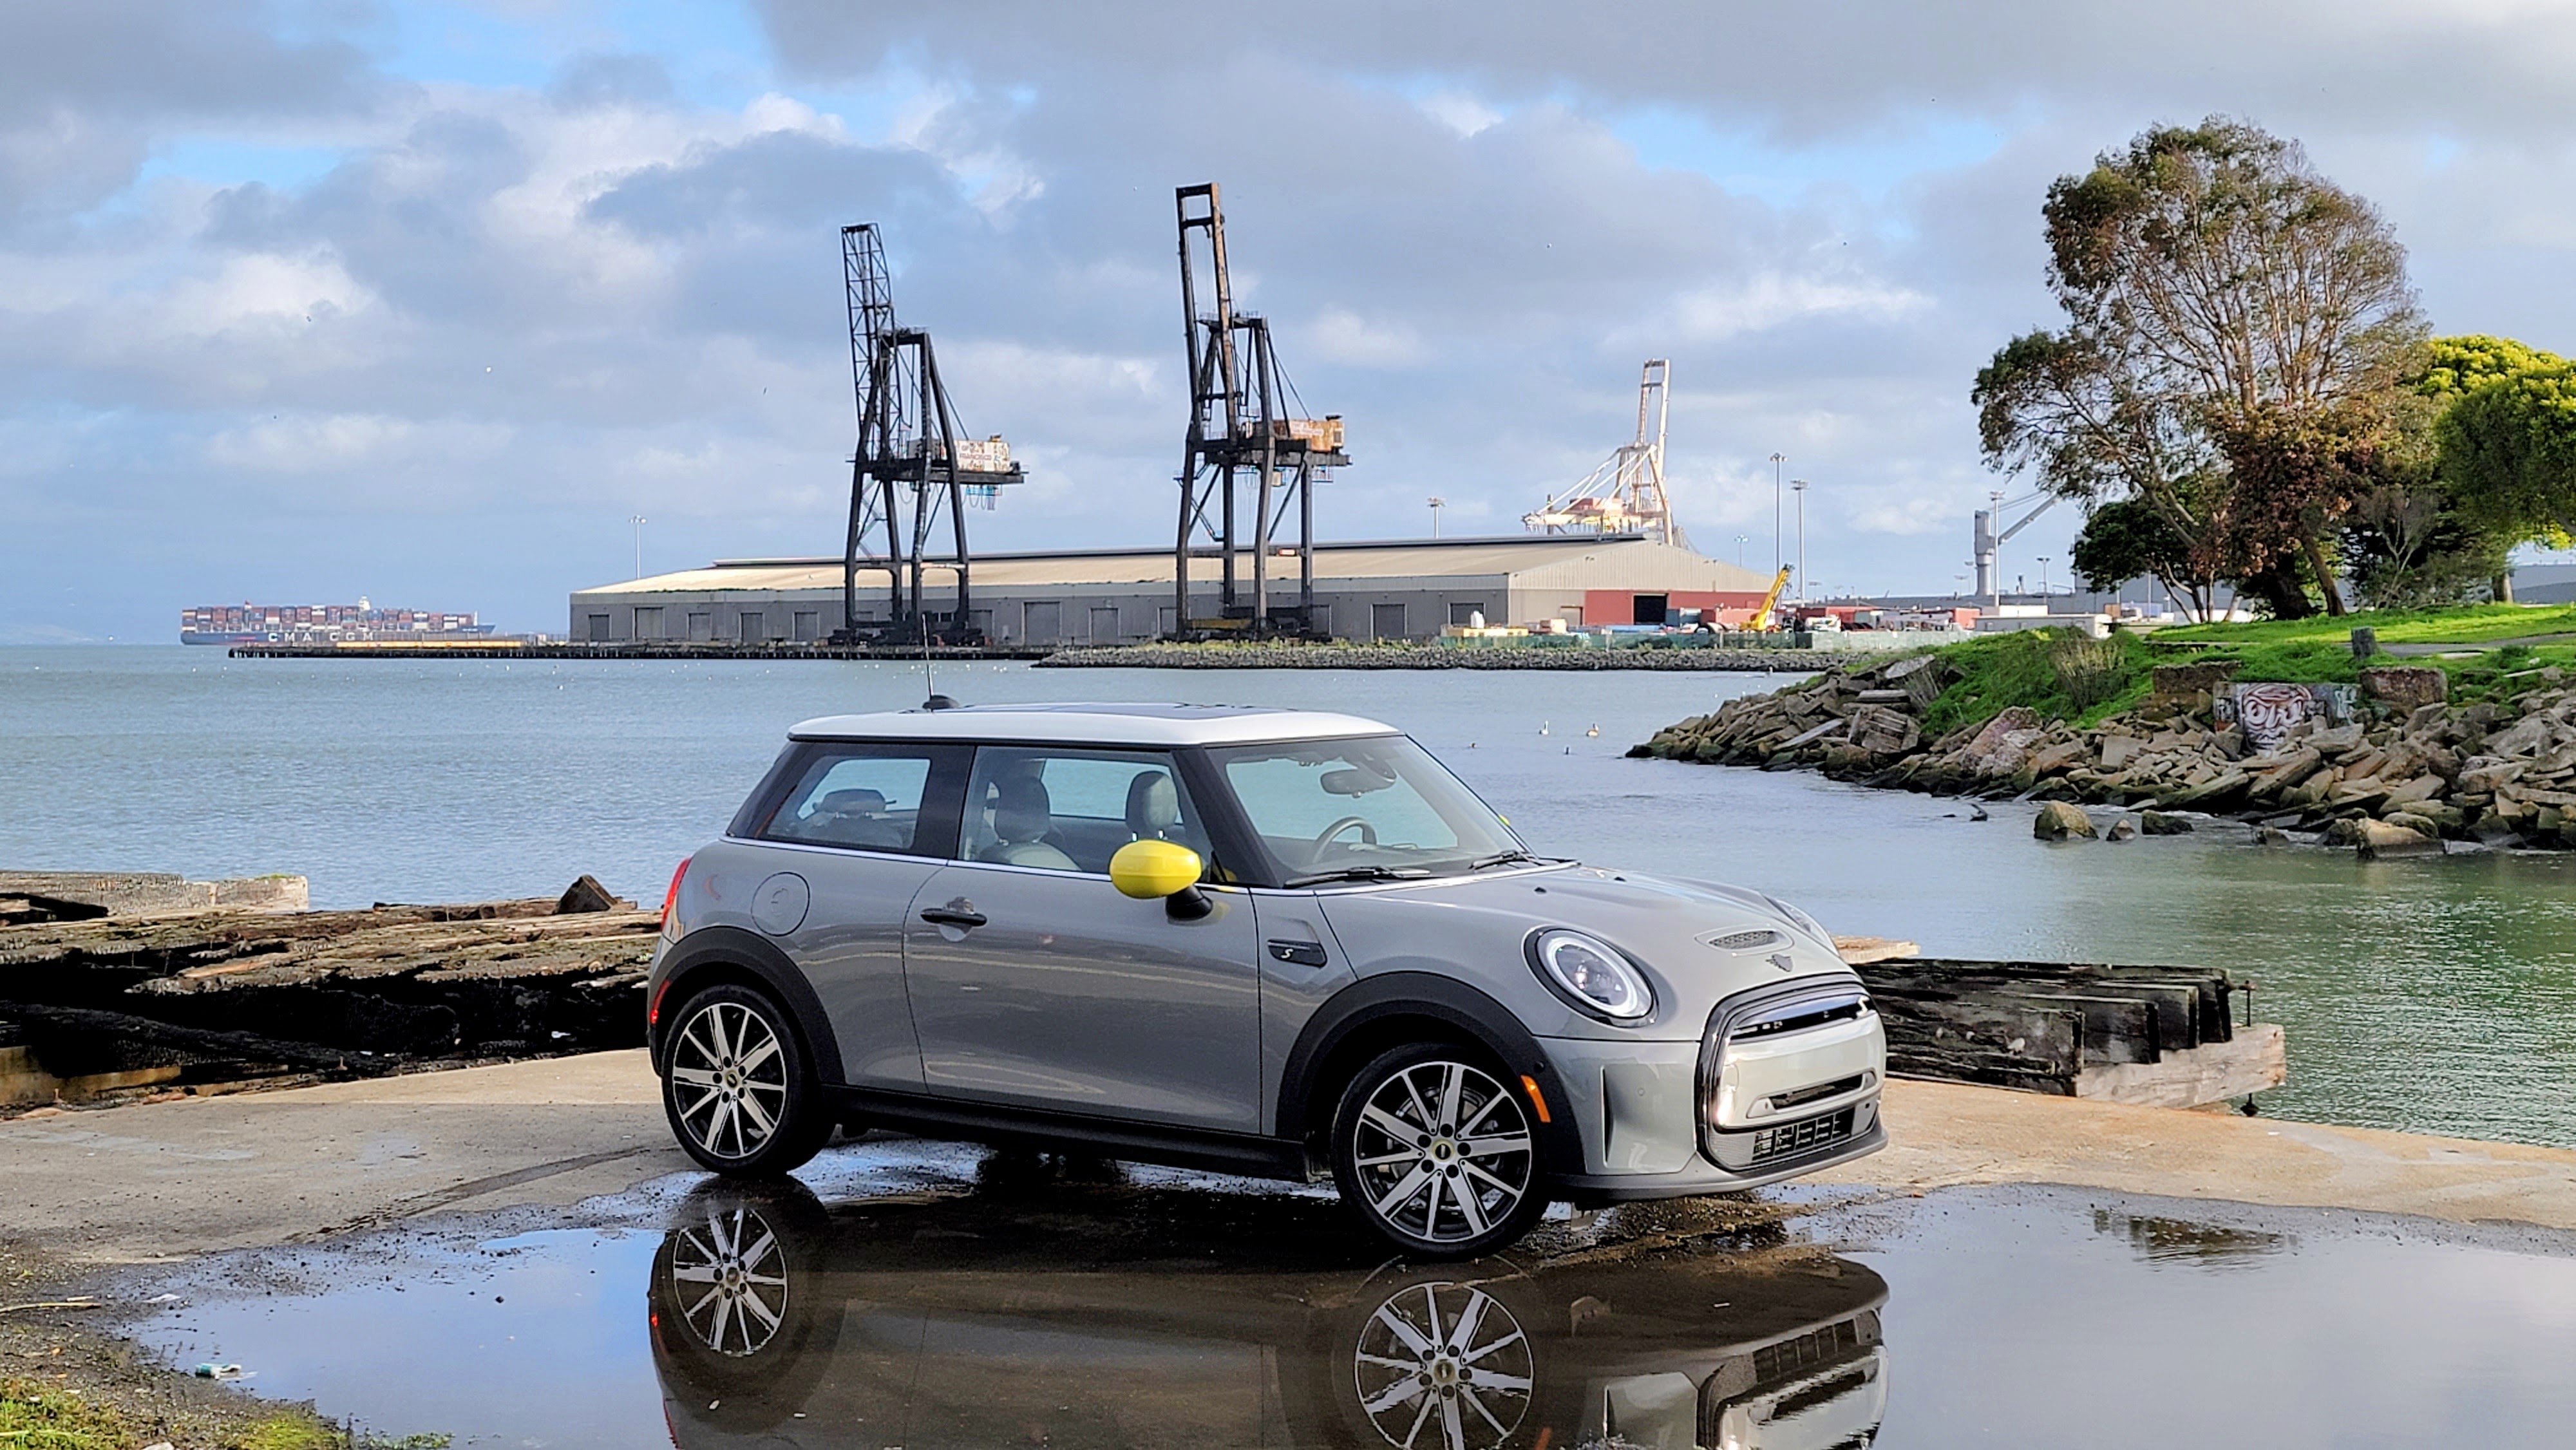 5 Features We Love About The New MINI Cooper Electric